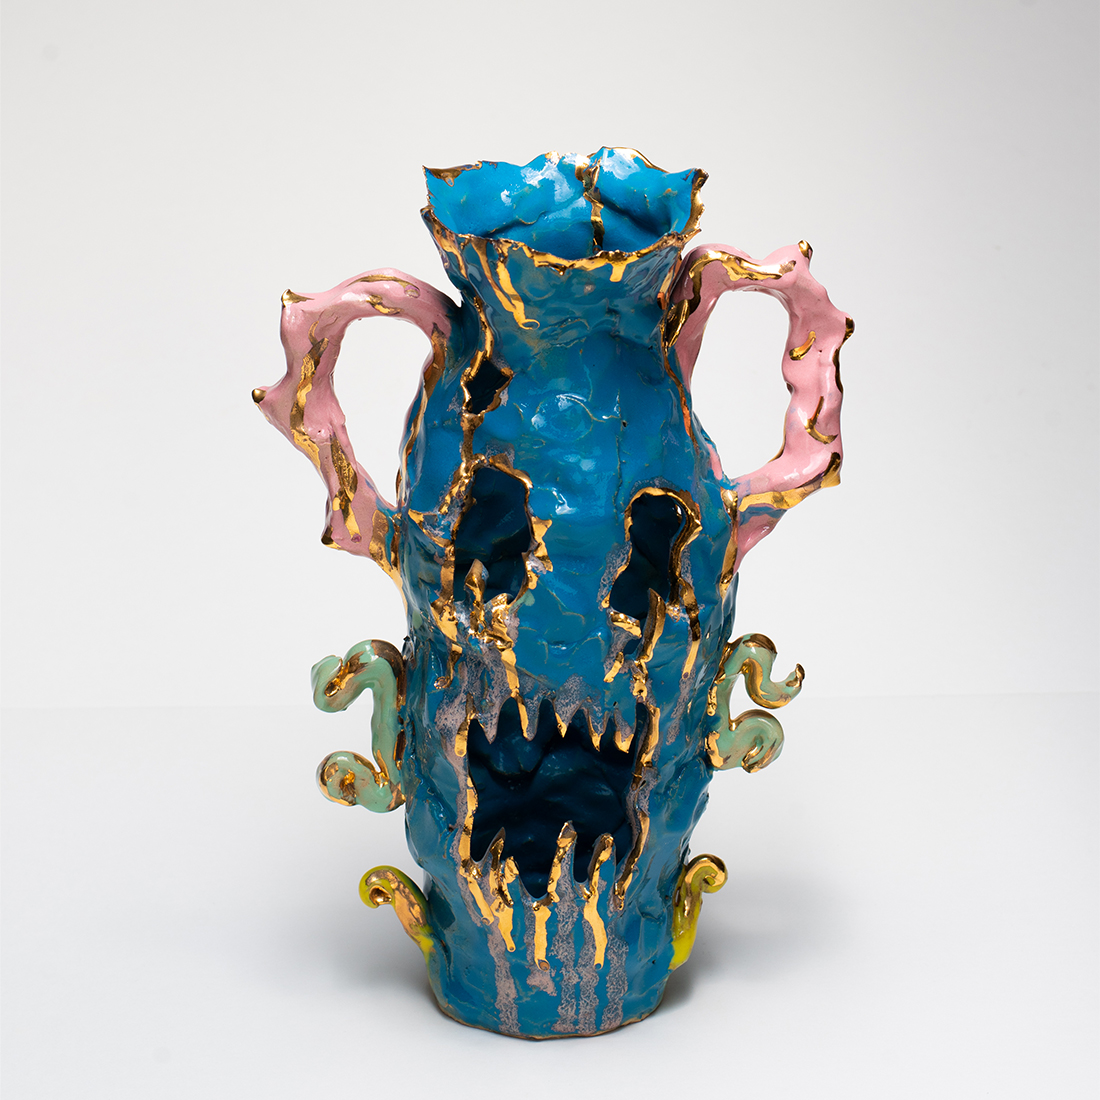 Scary-Vase in Candy Blue - Happy-Vase-with-Dots - Faye Hadfield - Pot - Ceramic Art - Florian Daguet-Bresson